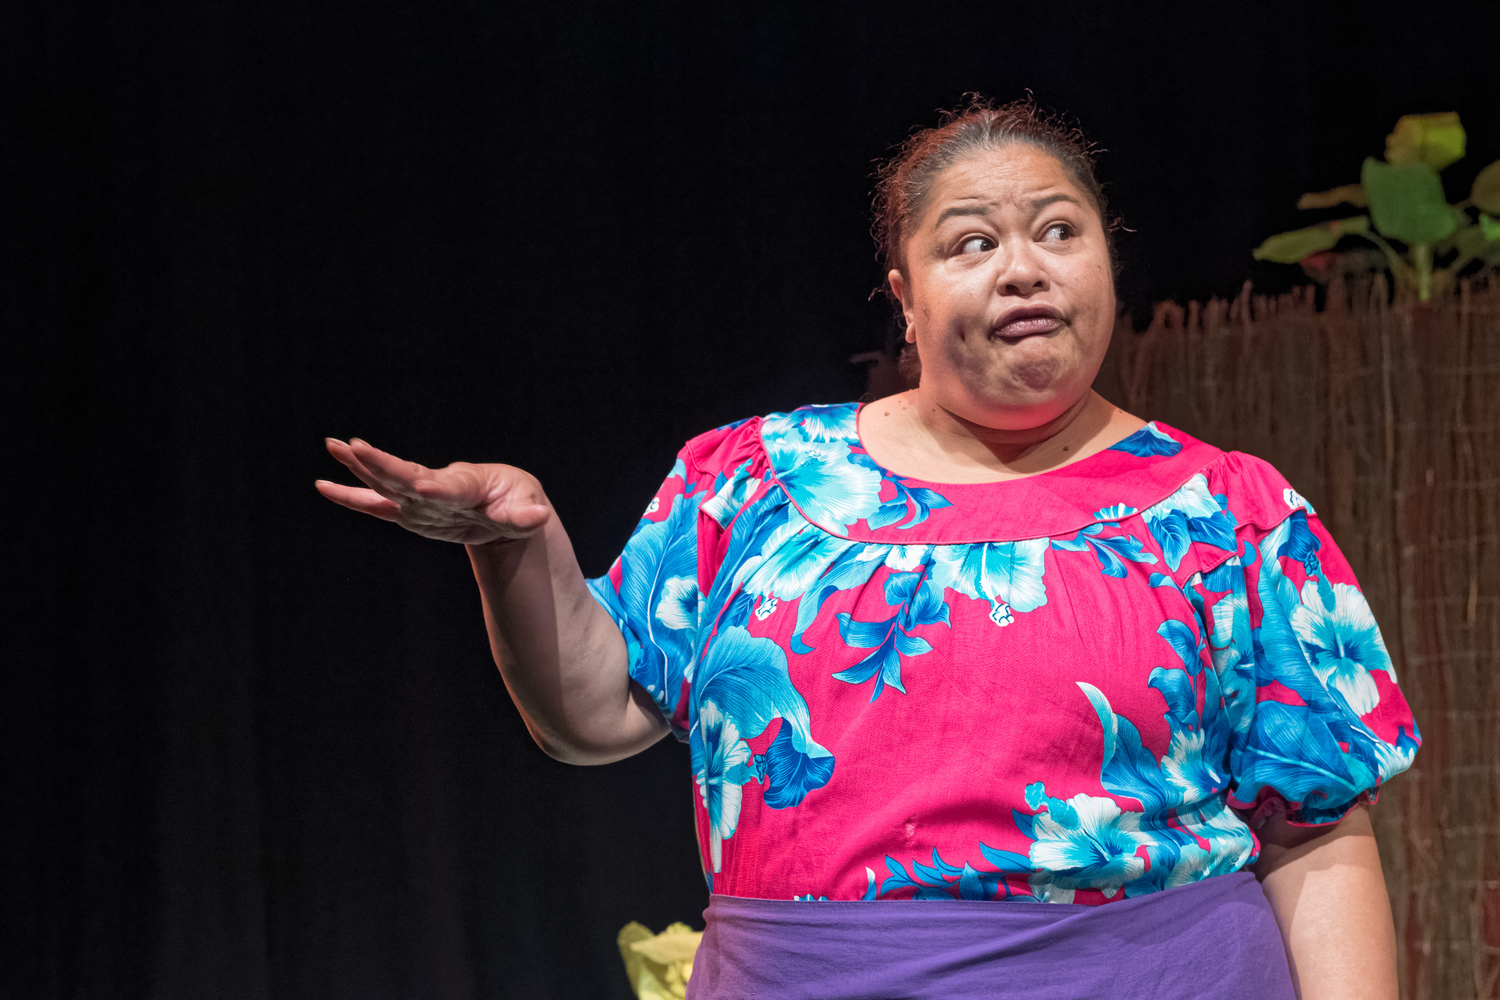 BWW Review: STILL LIFE WITH CHICKENS at Mangere Arts Centre 